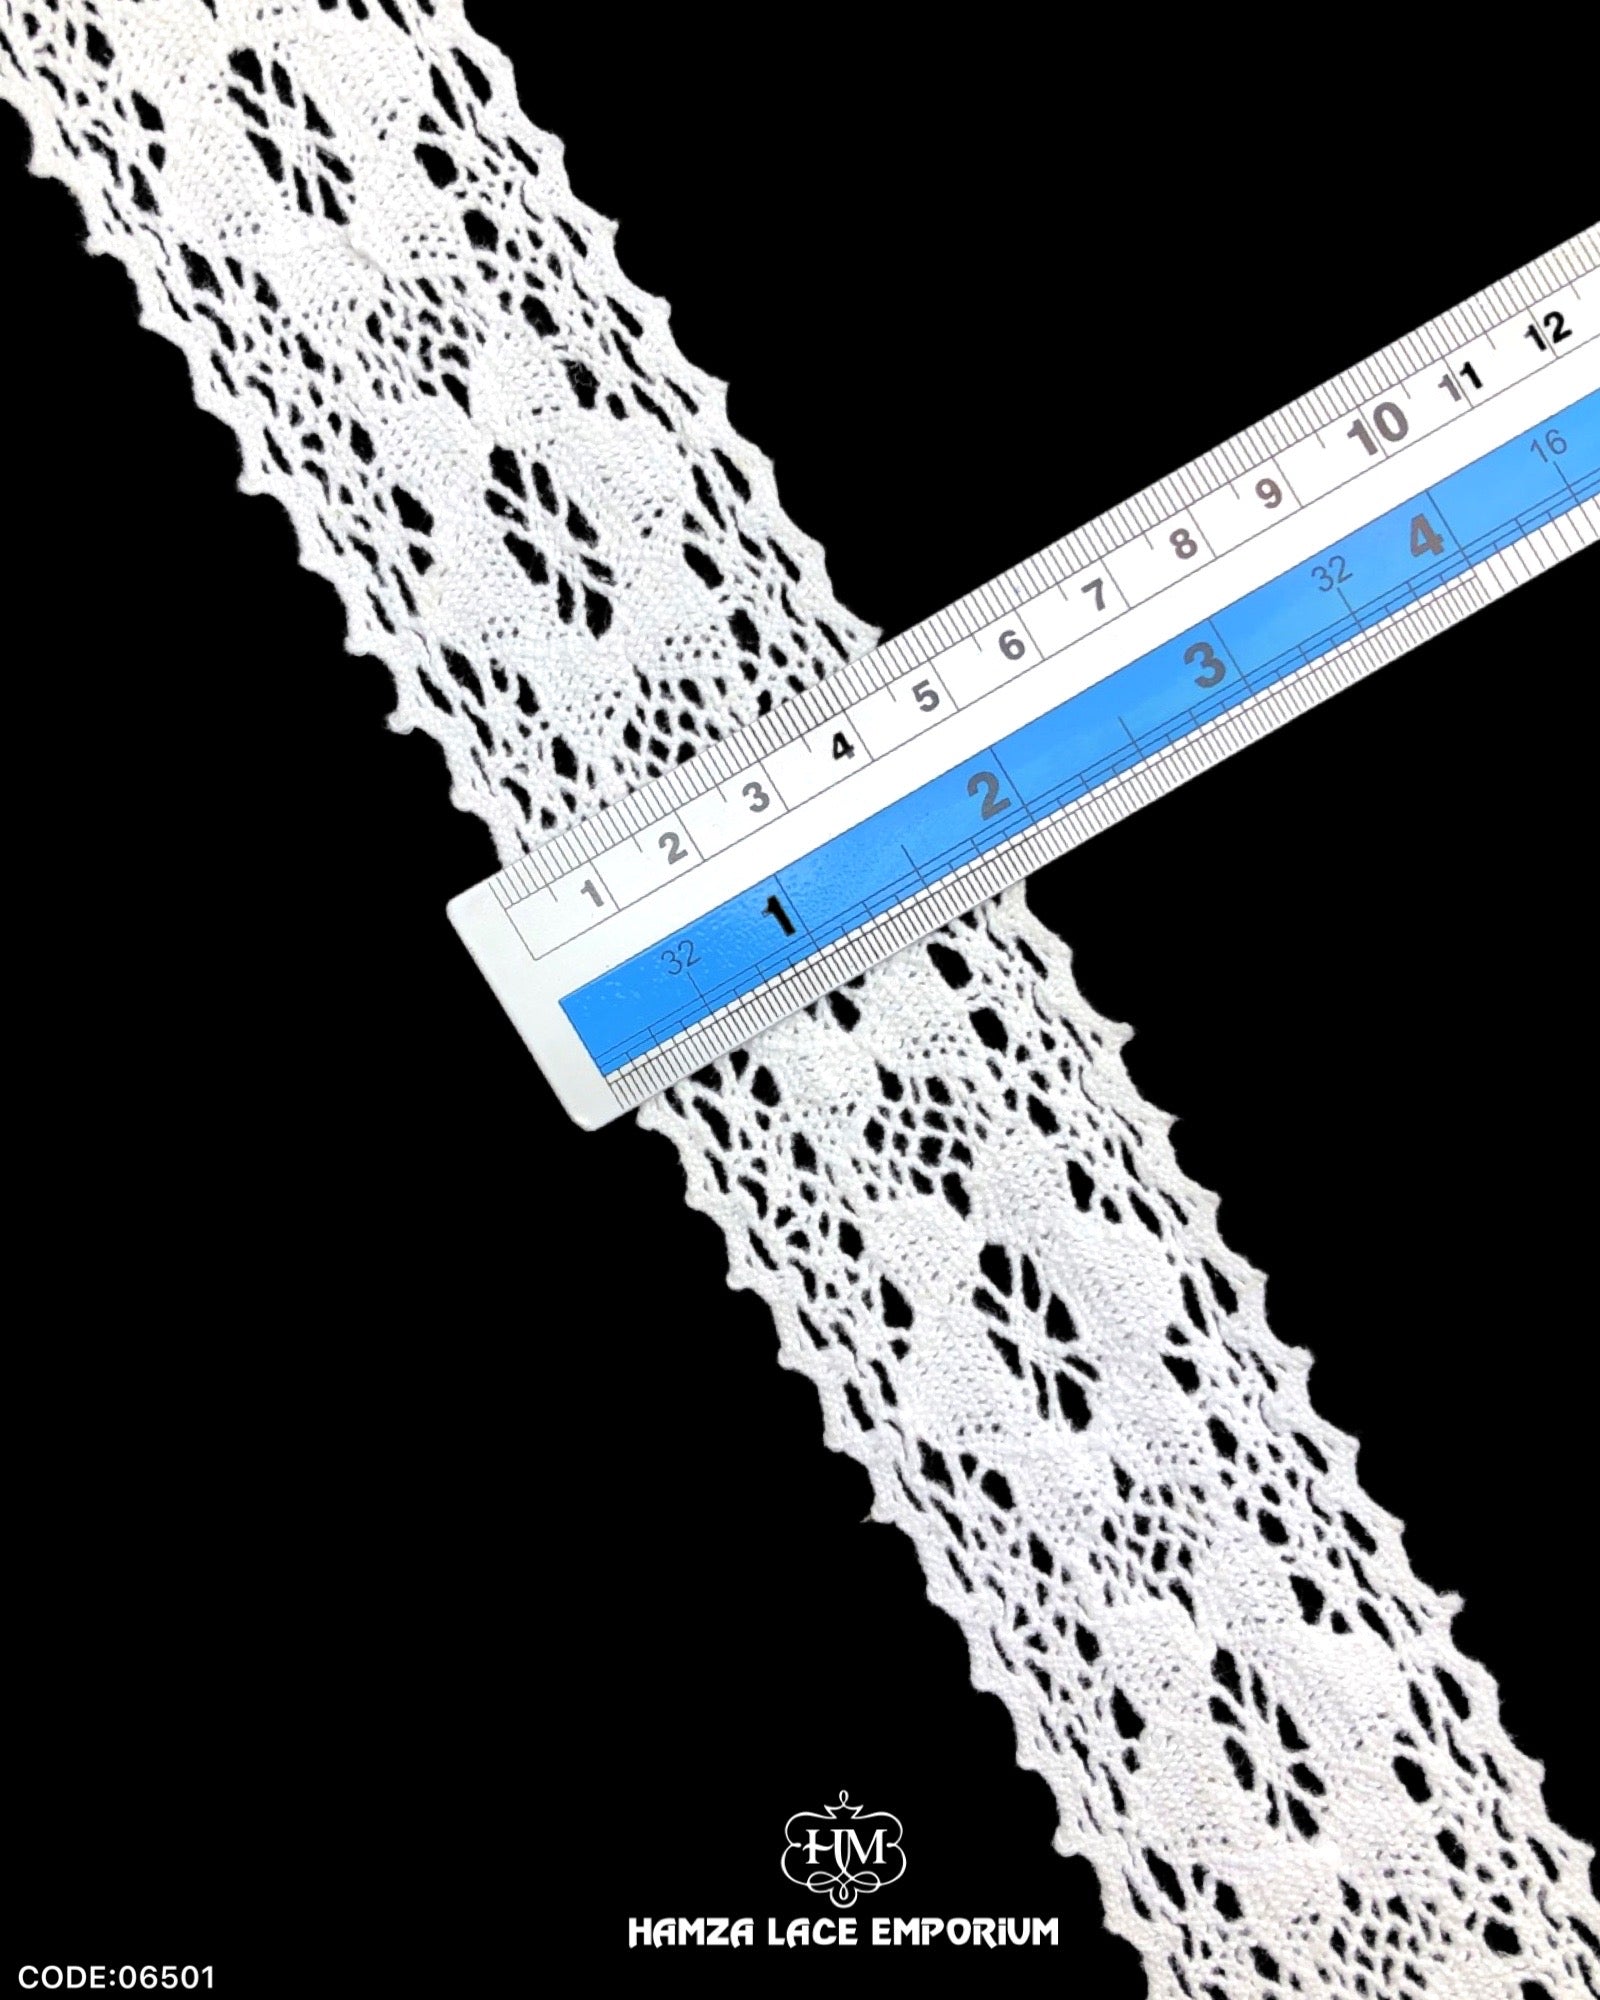 Size of the 'Center Filling Crochet Lace 06501' is given with the help of a ruler as '2' inches